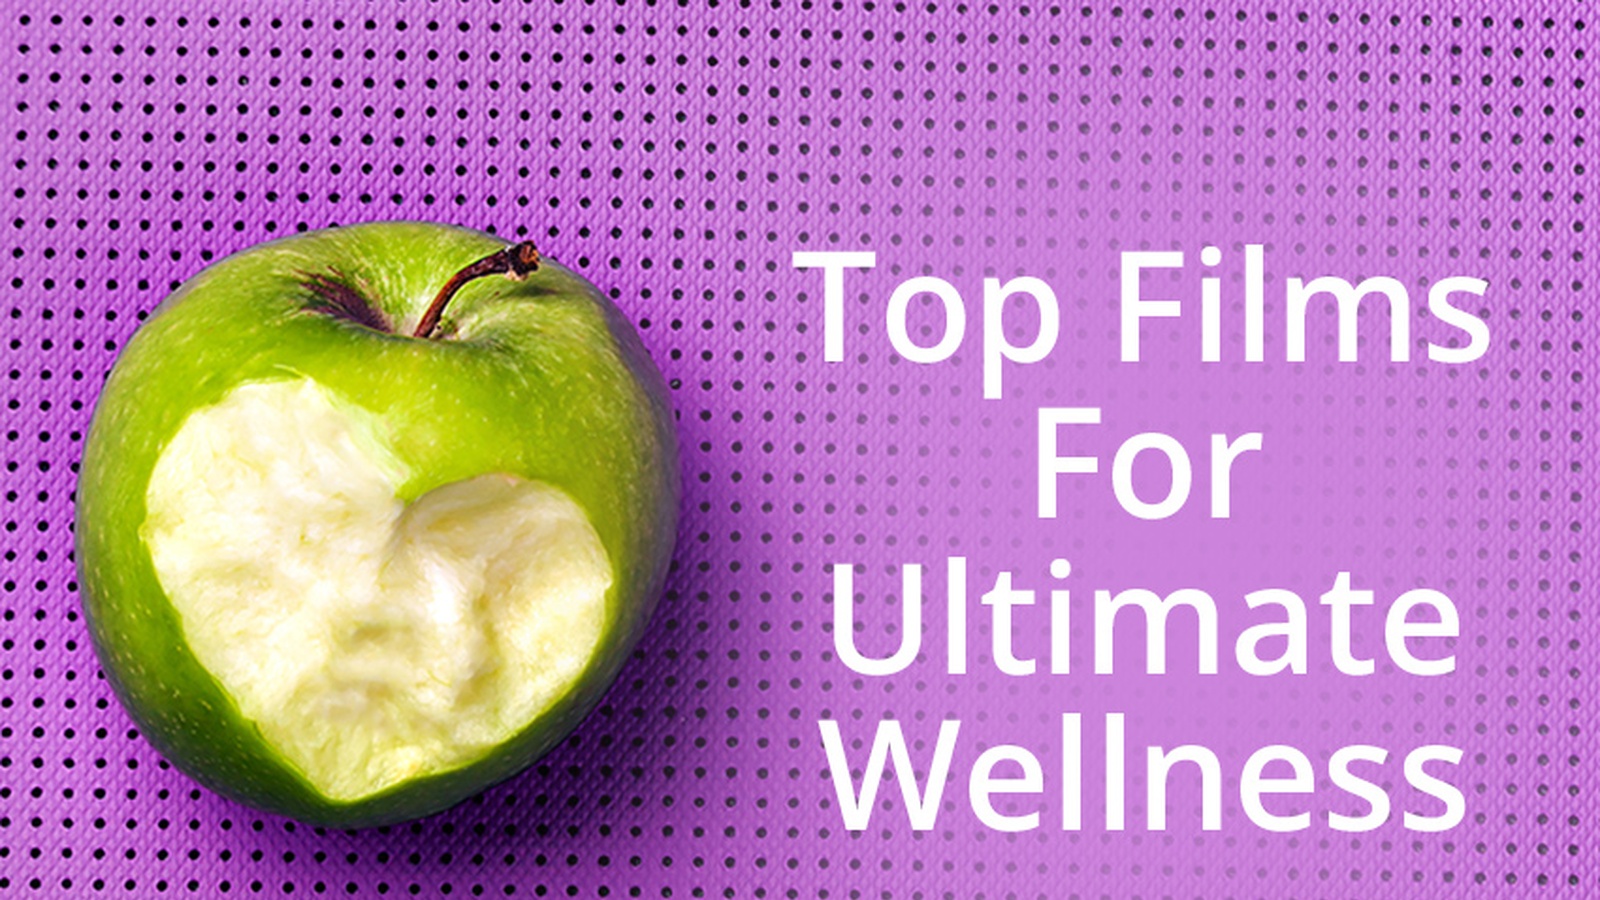 Top Films For Ultimate Wellness